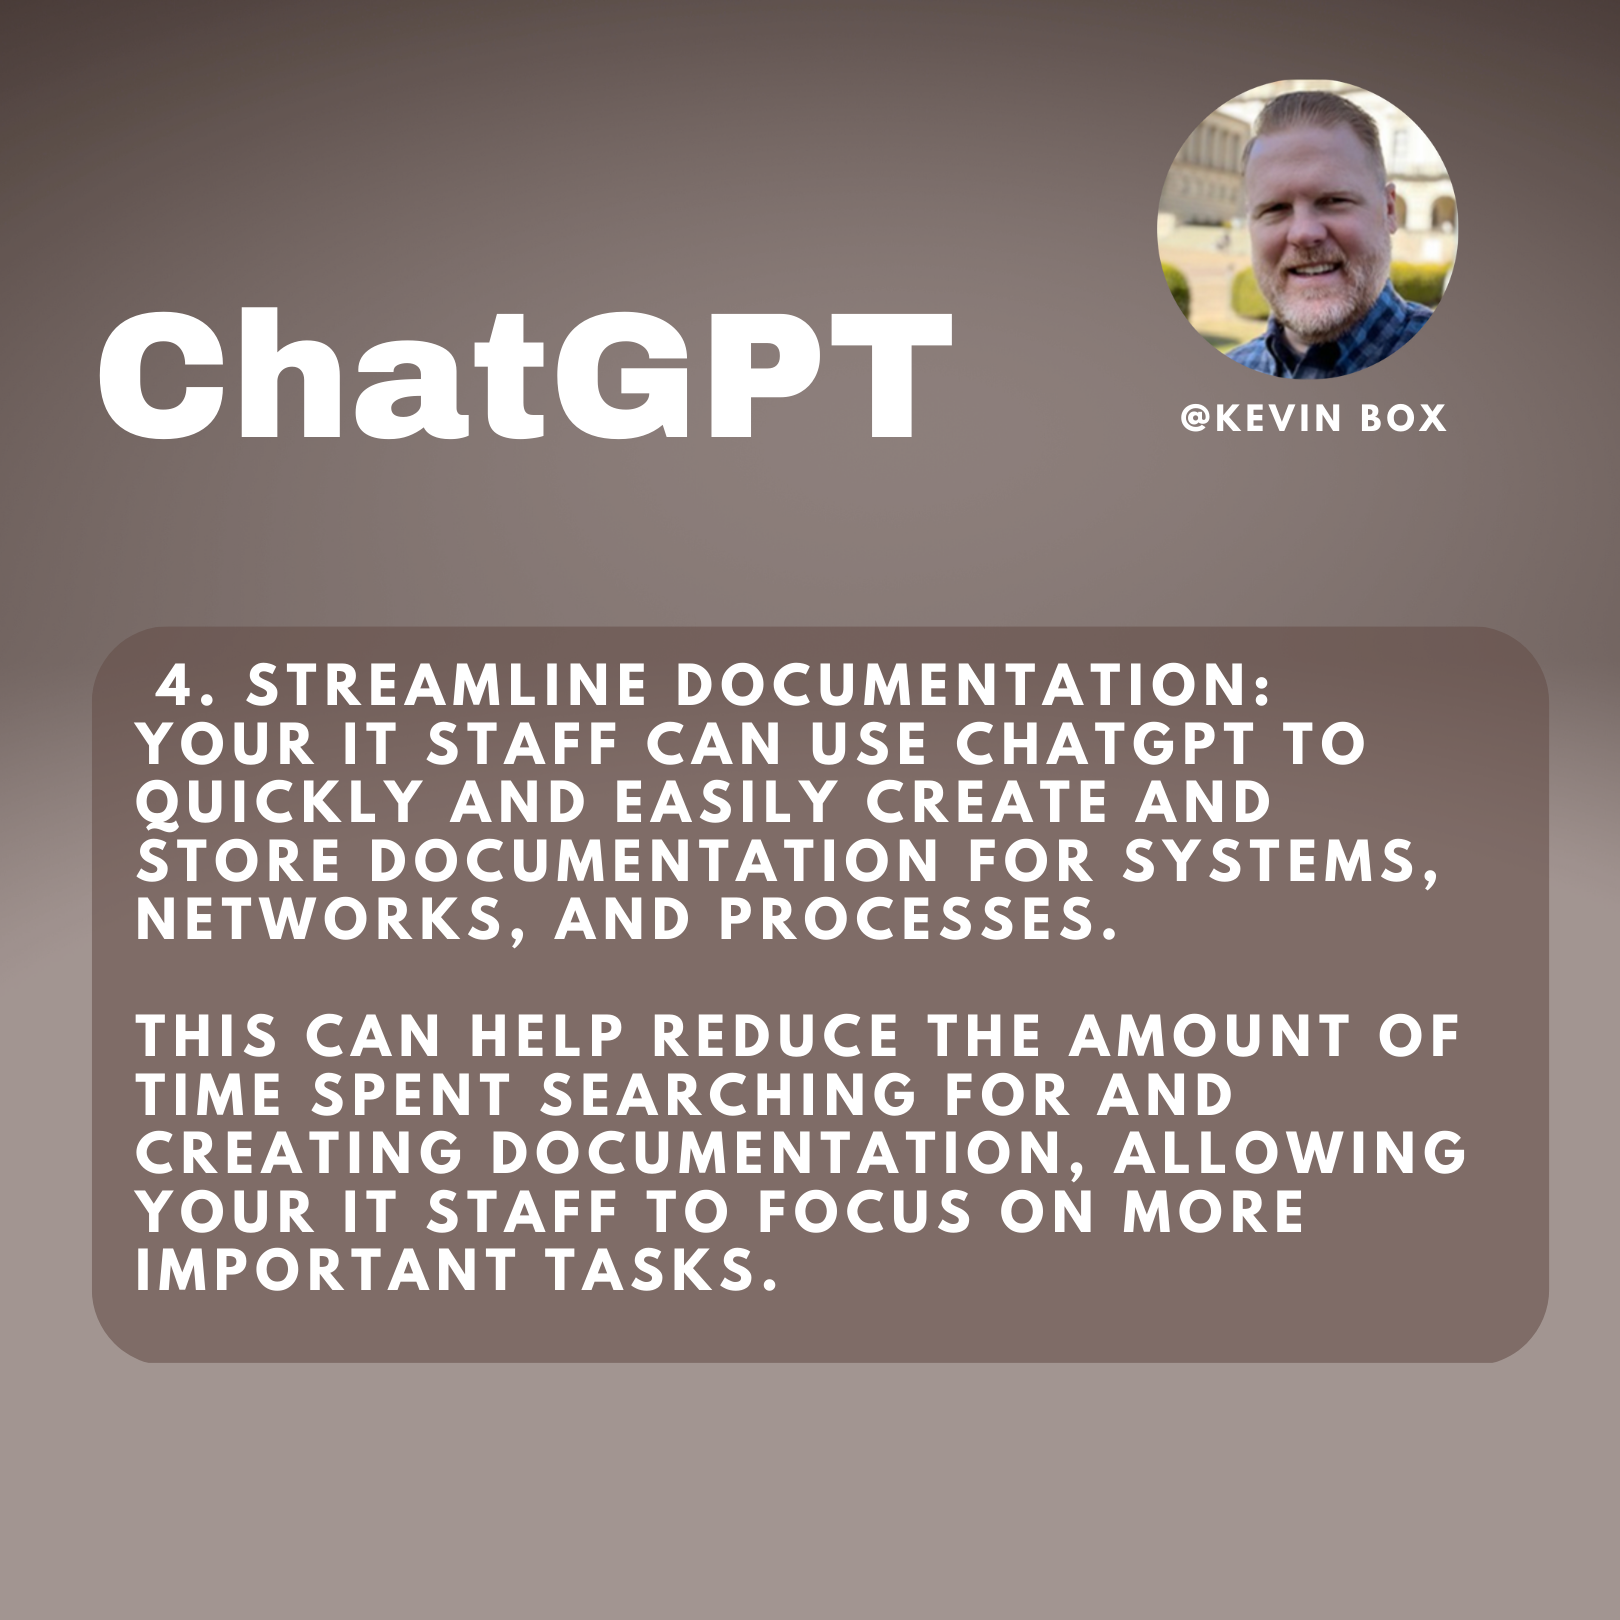 Unlock the Potential of ChatGPT: 5 Ways to Streamline IT Management #5